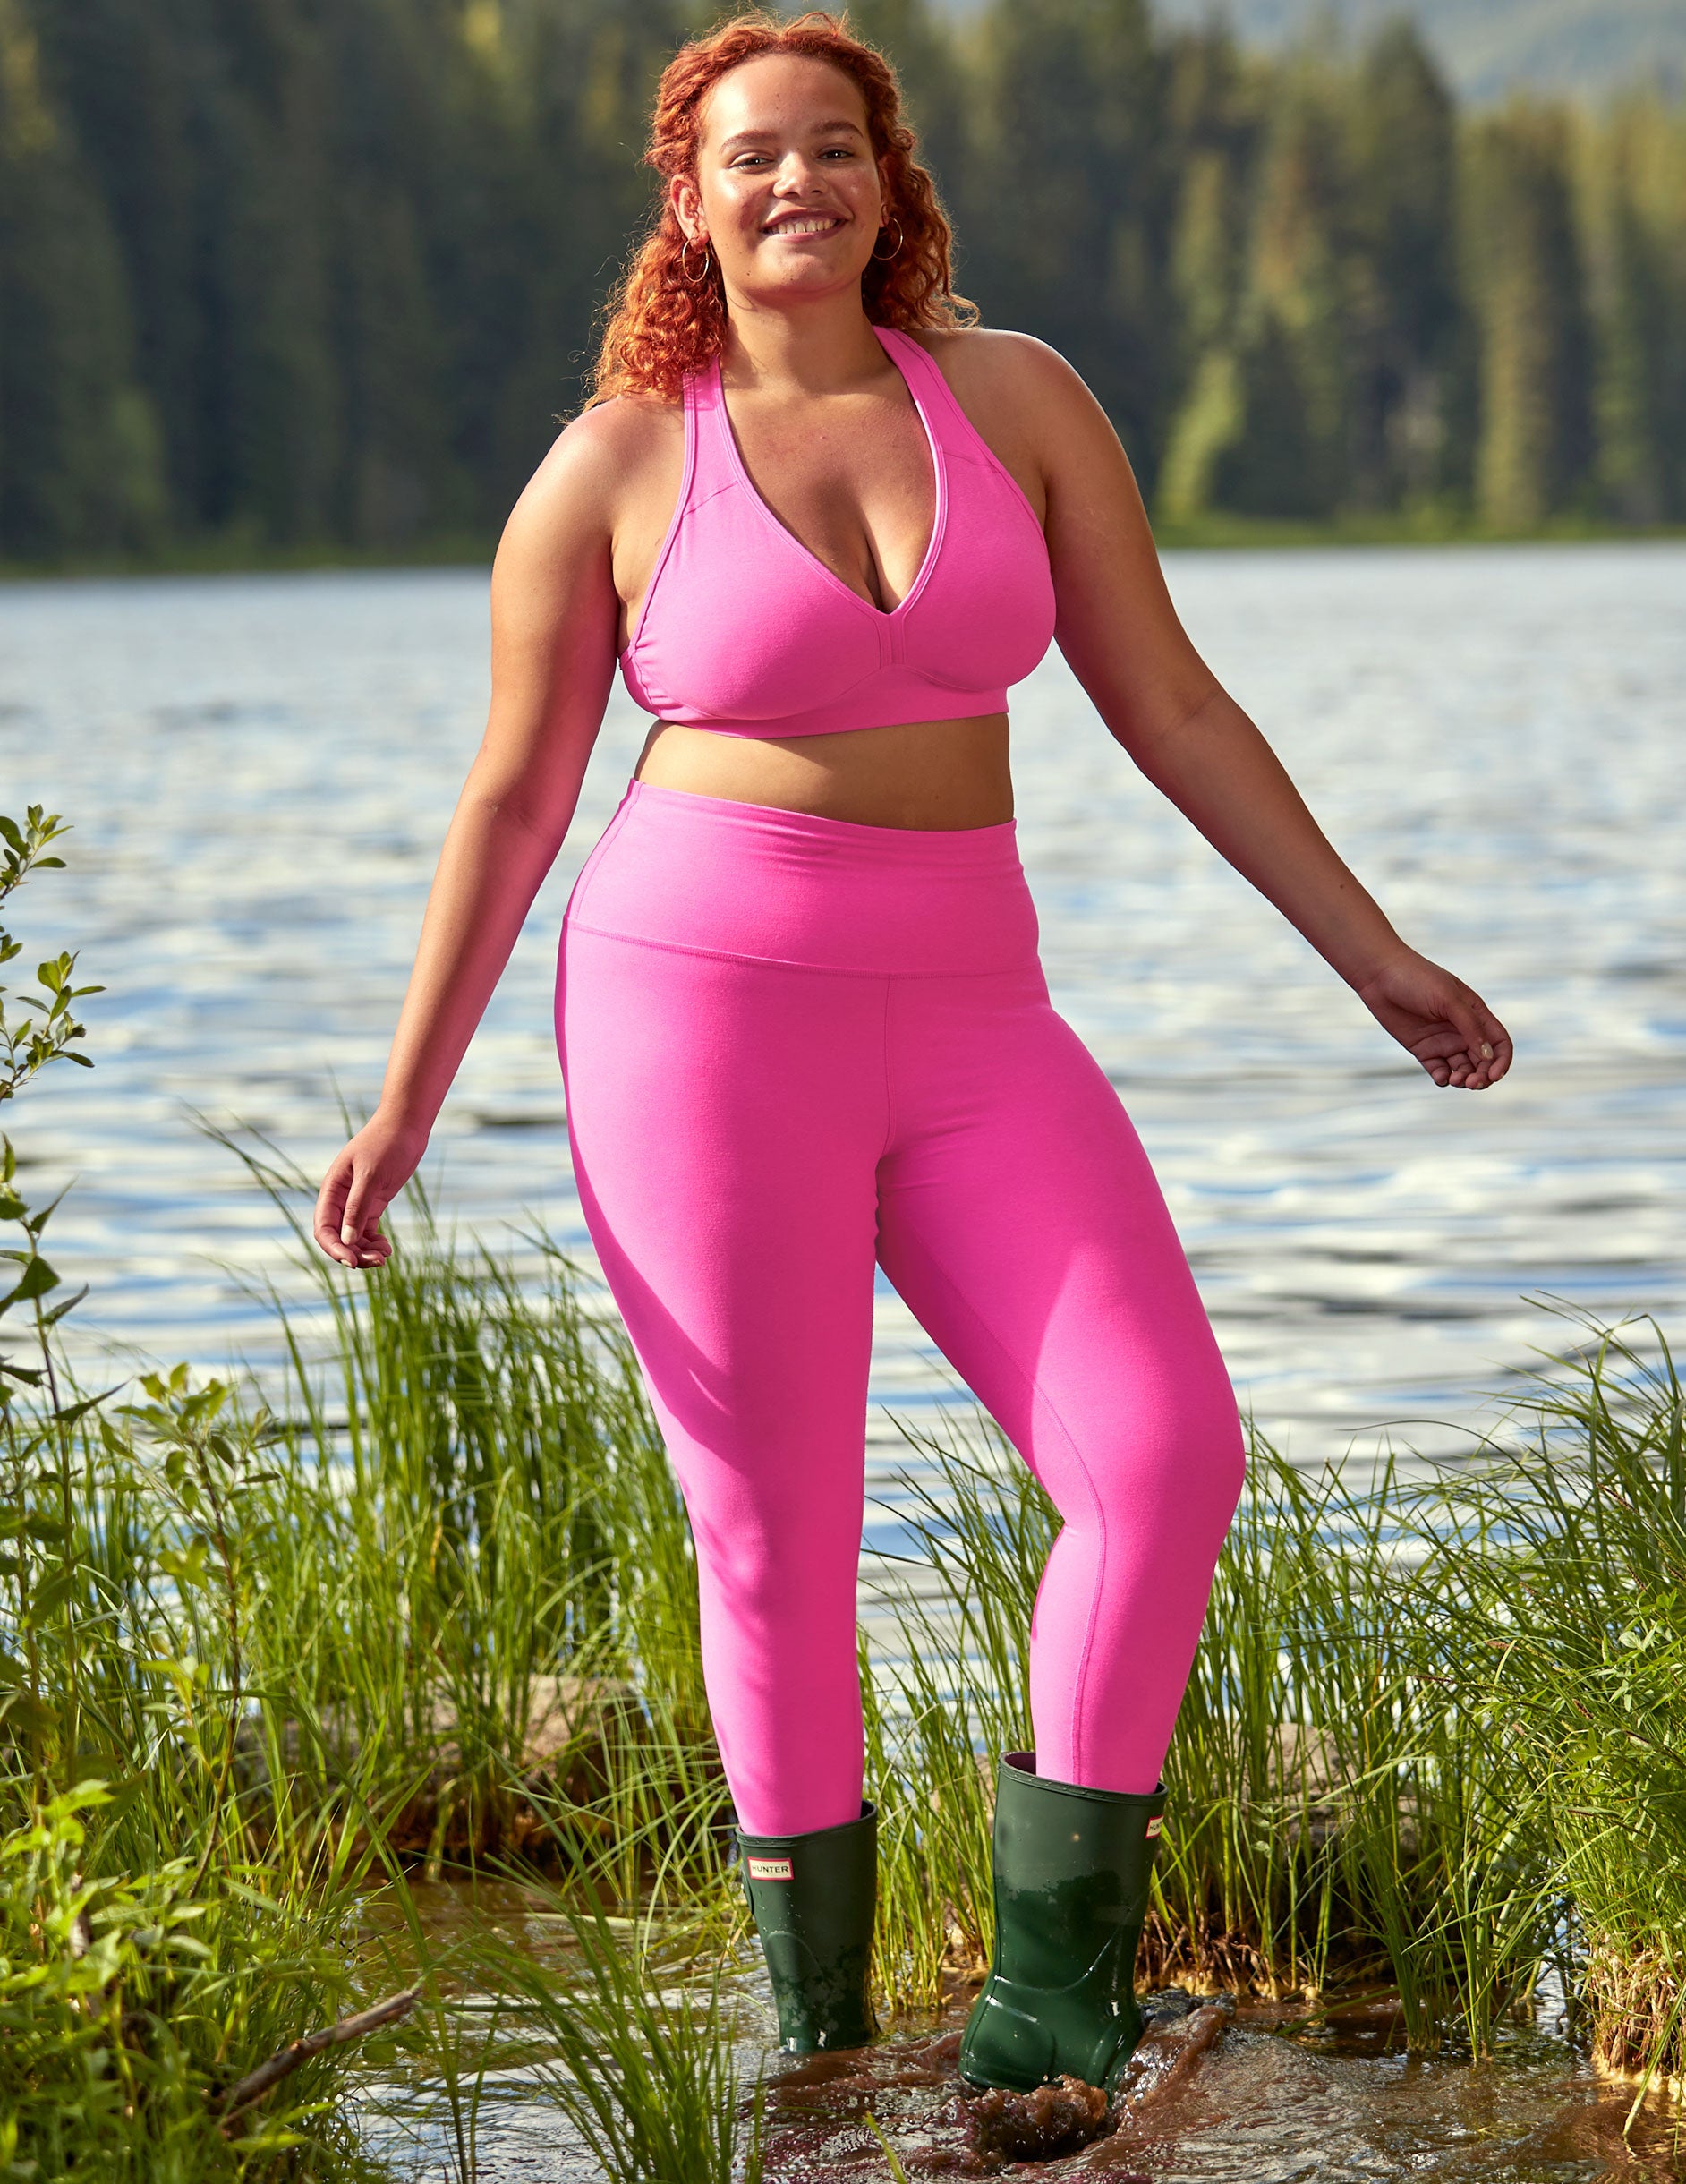 Beyond Yoga Spacedye Caught In The Midi High Waisted Legging  Workout  attire, Stylish workout clothes, High waisted leggings